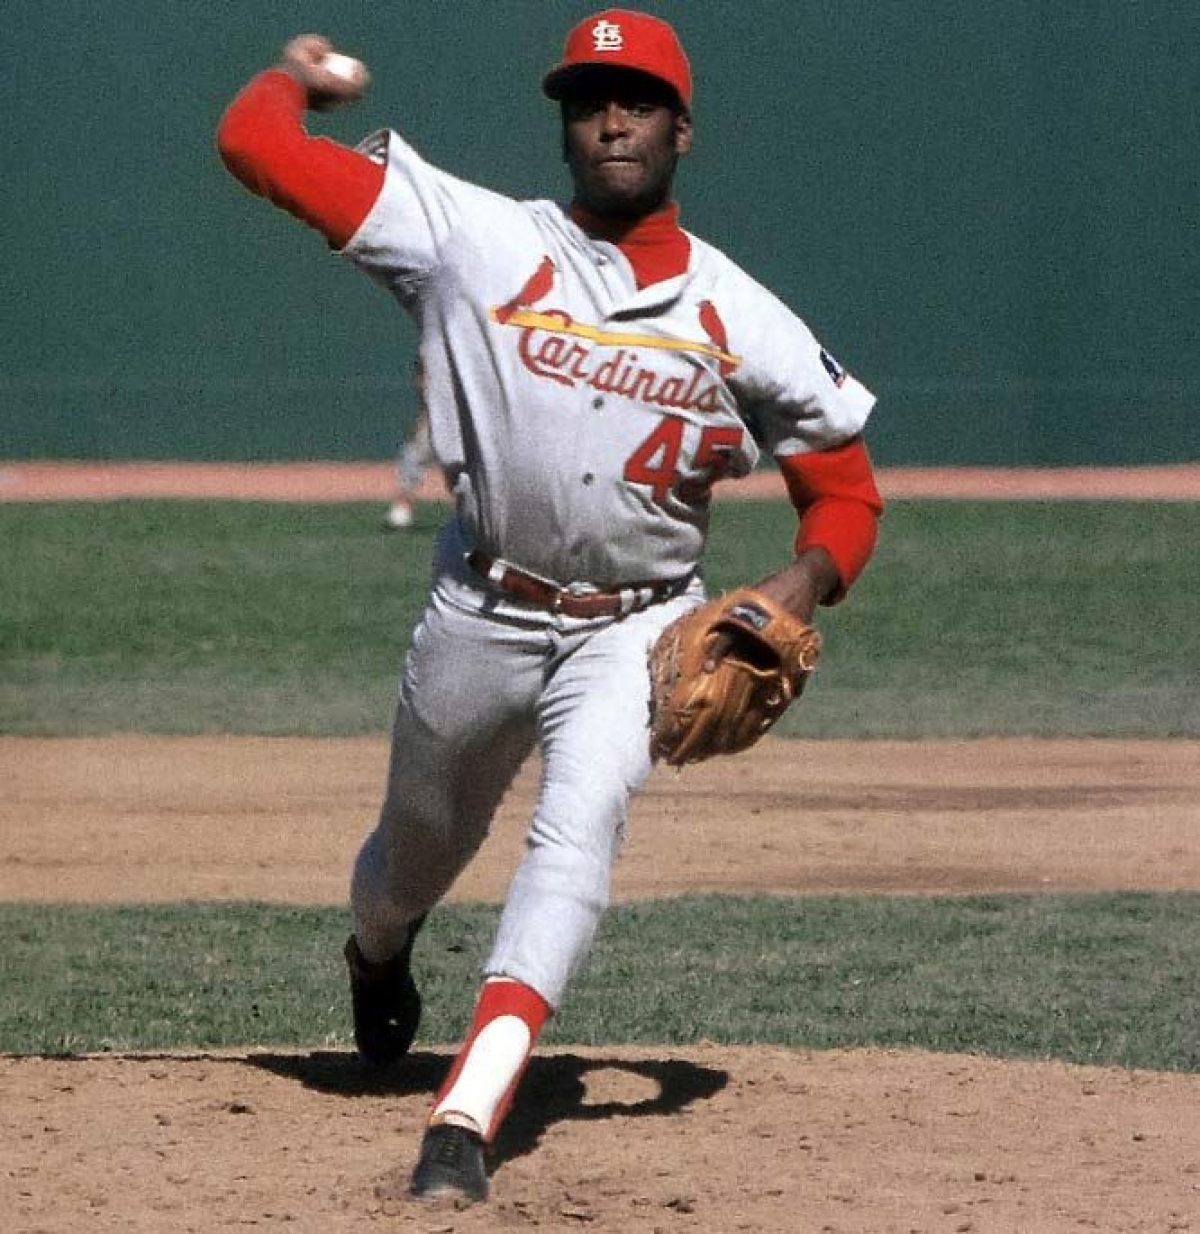 Not in Hall of Fame - 4. Bob Gibson